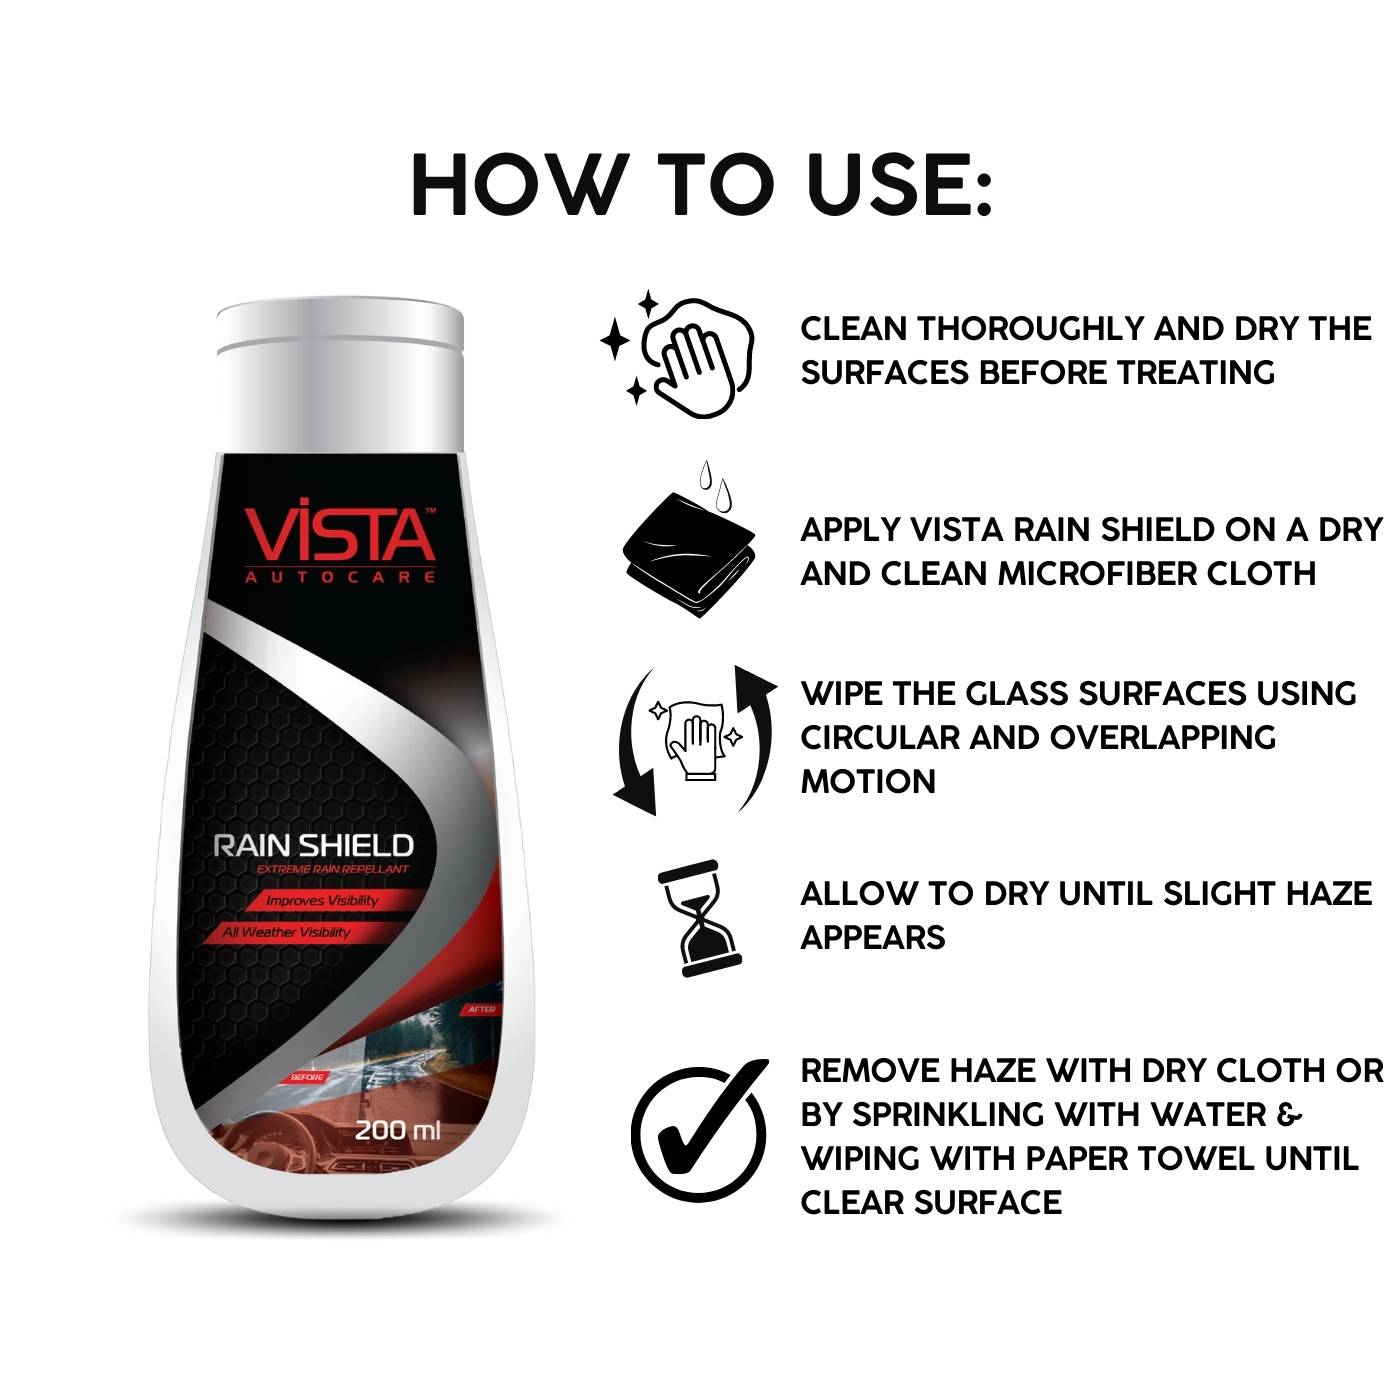 Clean thoroughly and dry the surfaces before treating. Apply Vista Rain Shield on a dry and clean microfiber cloth. Wipe the glass surfaces using circular and overlapping motion. Allow to dry until slight haze appears. Remove haze with dry cloth or by sprinkling with water & wiping with paper towel until clear surface. 